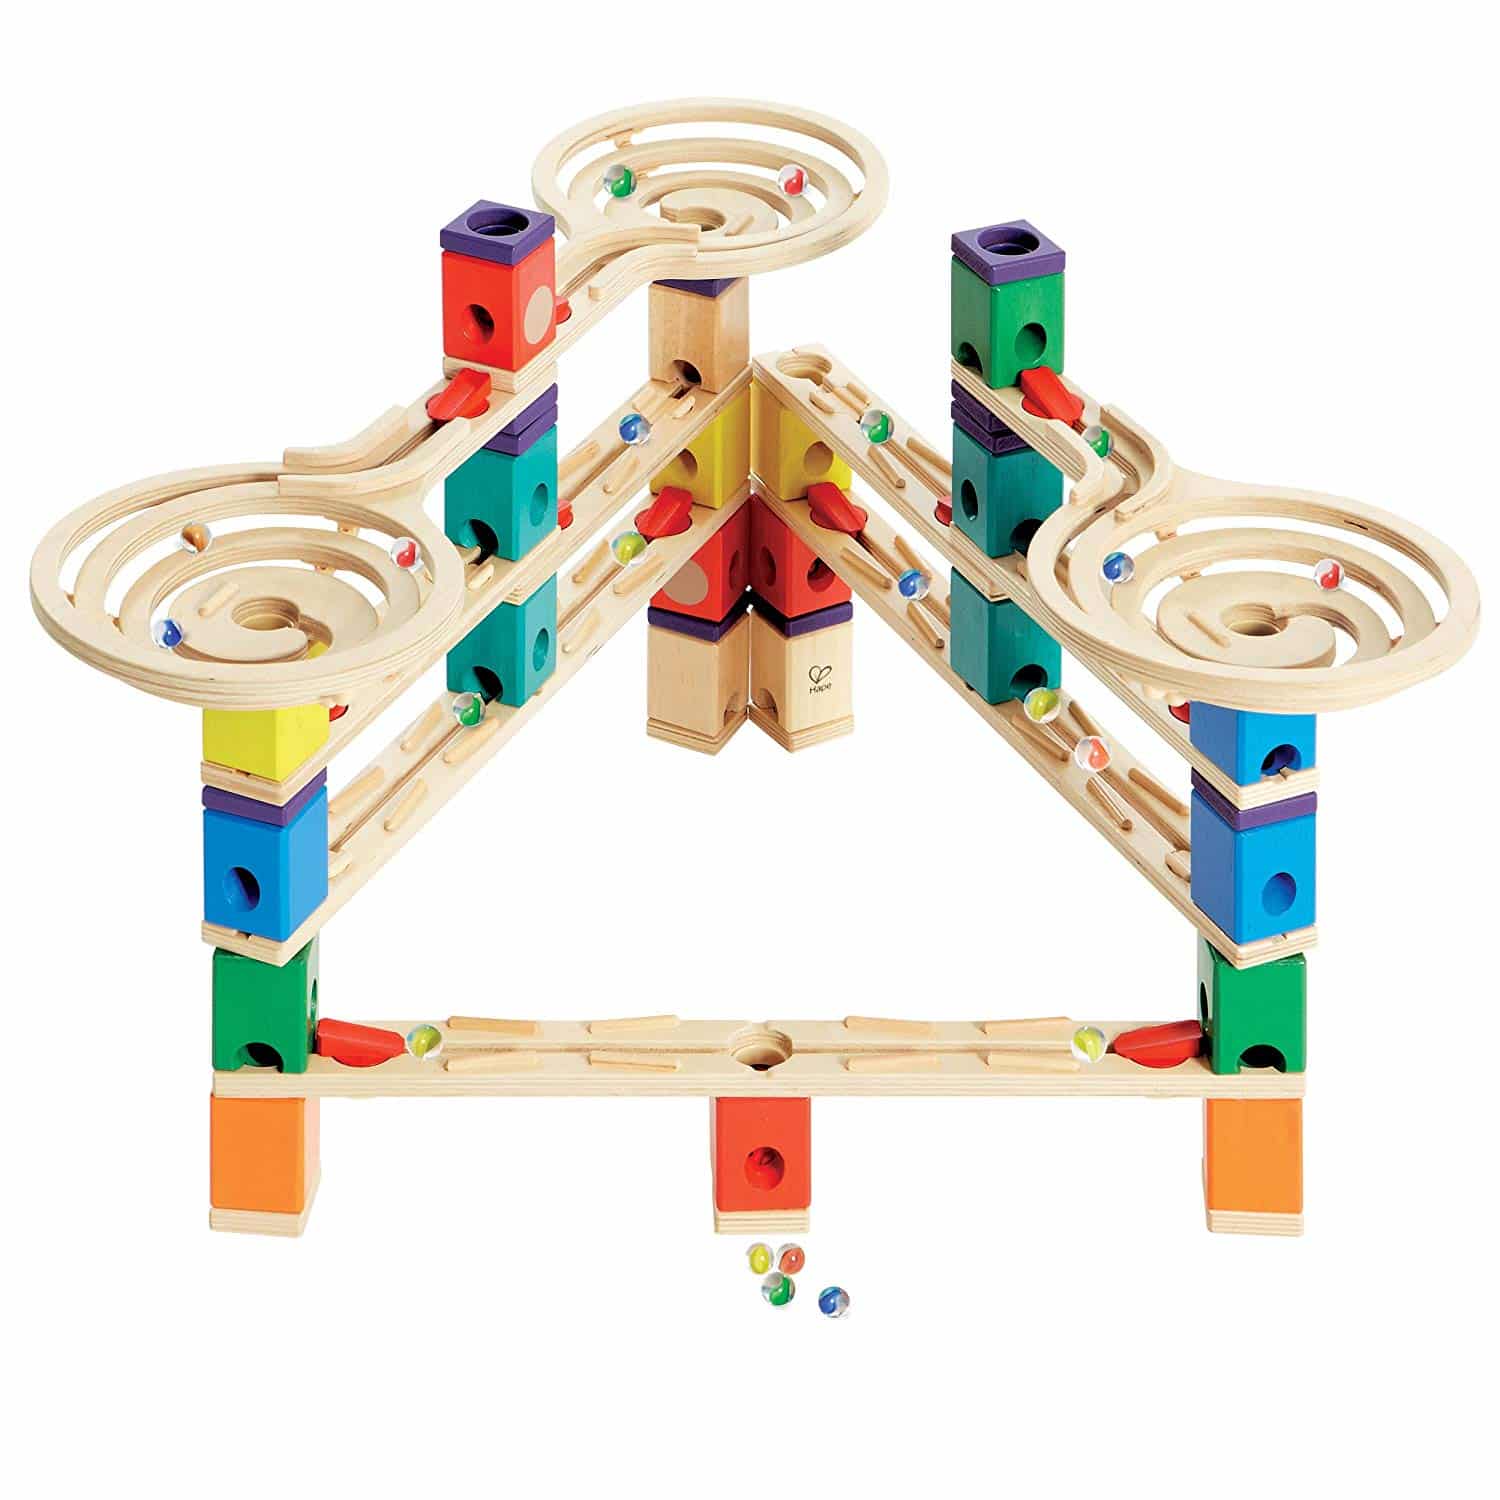 DEAL ALERT: Hape Wooden Marble Run Construction Systems up to 58% off!